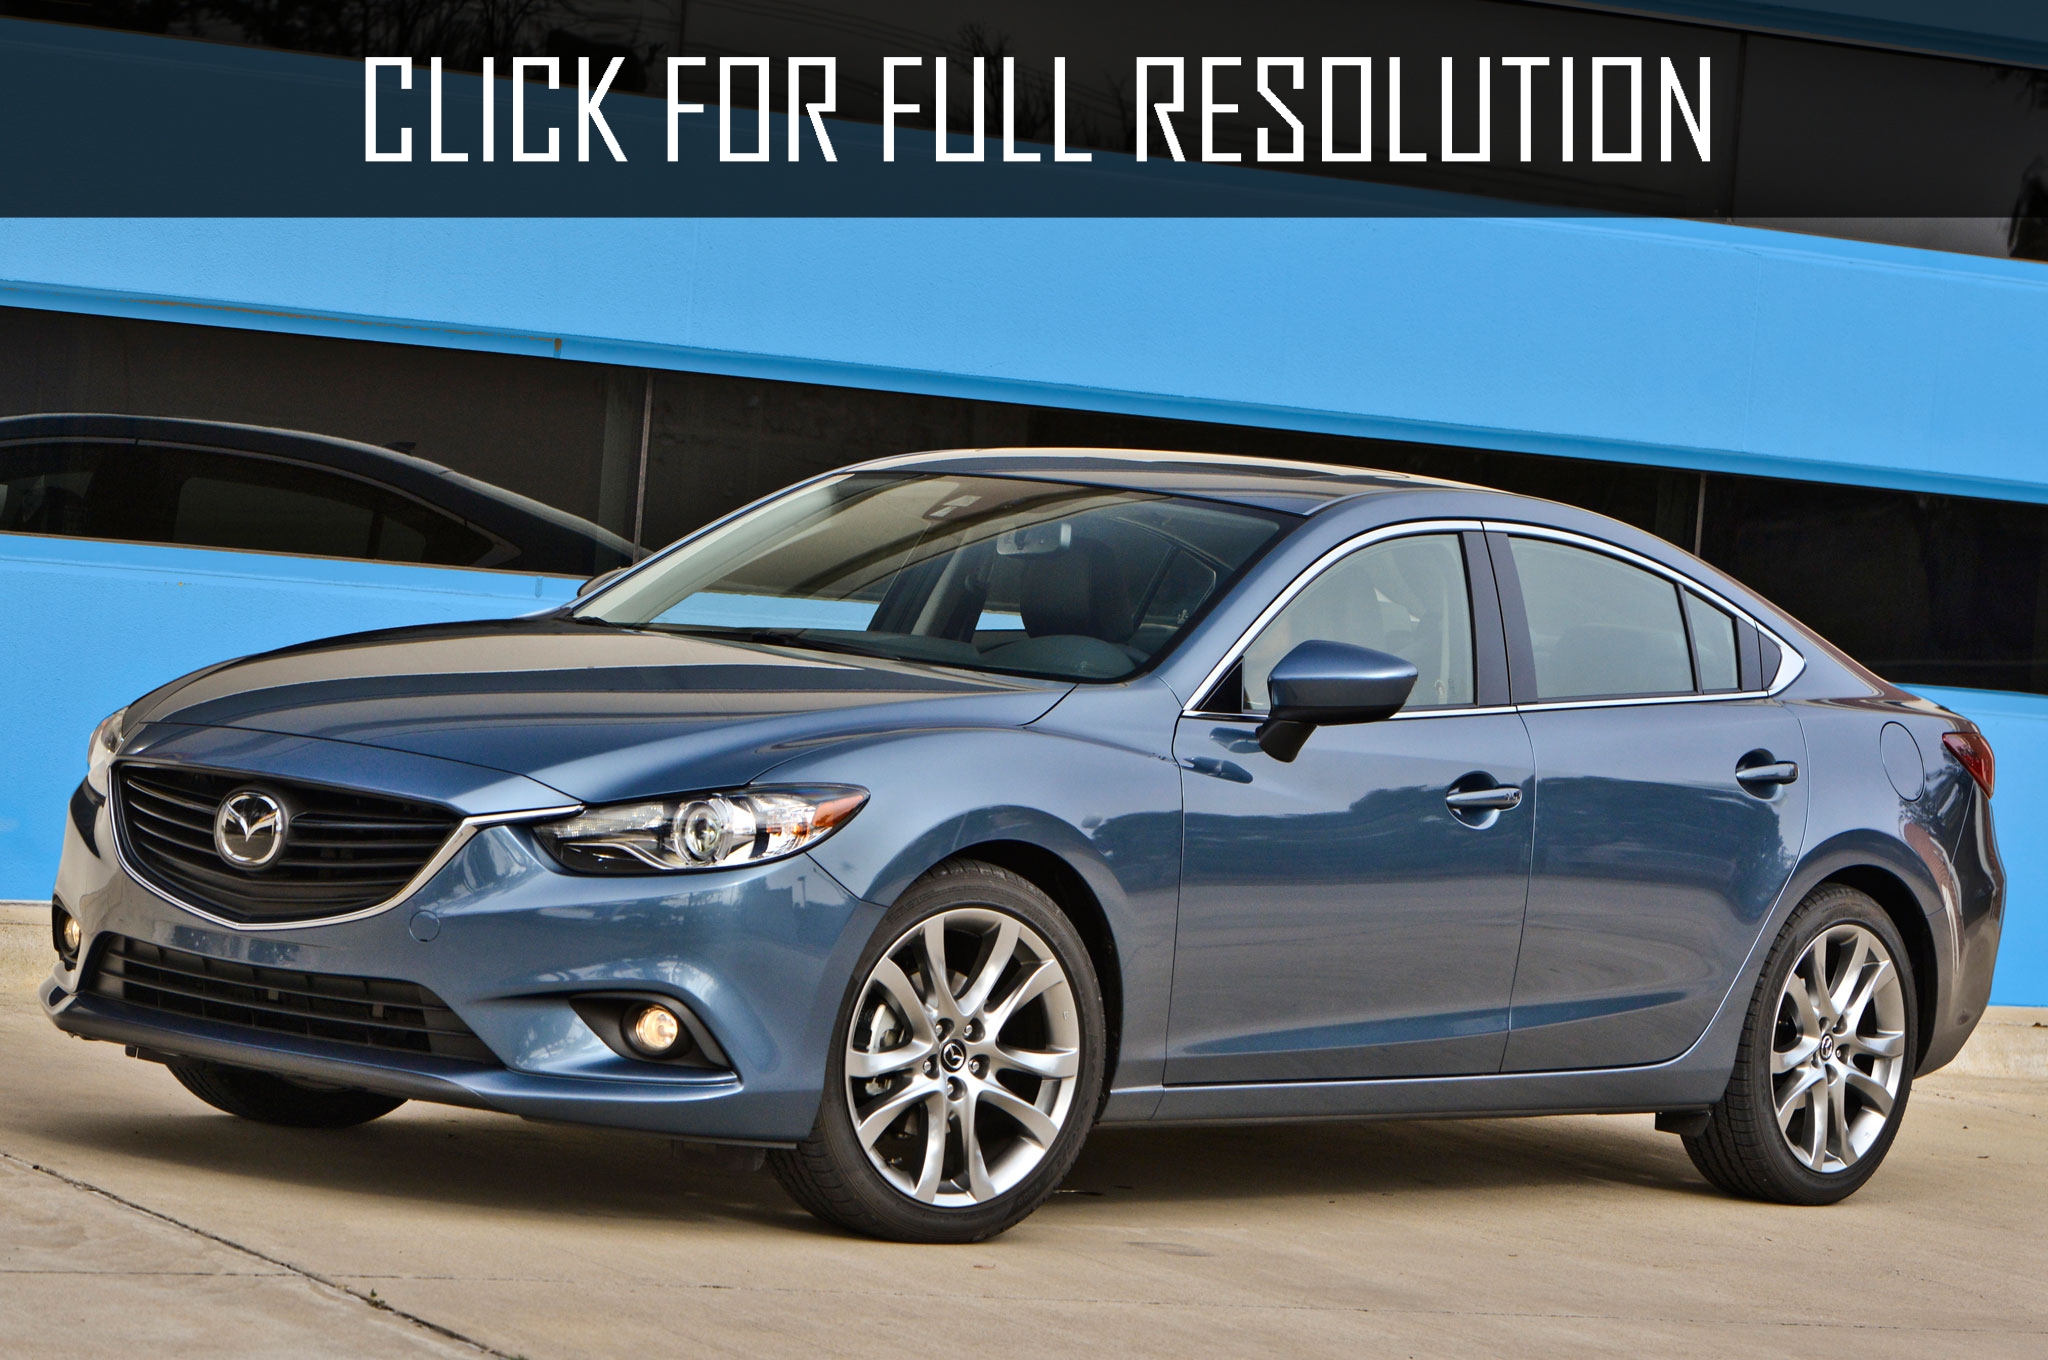 2014 Mazda 6 Gt news, reviews, msrp, ratings with